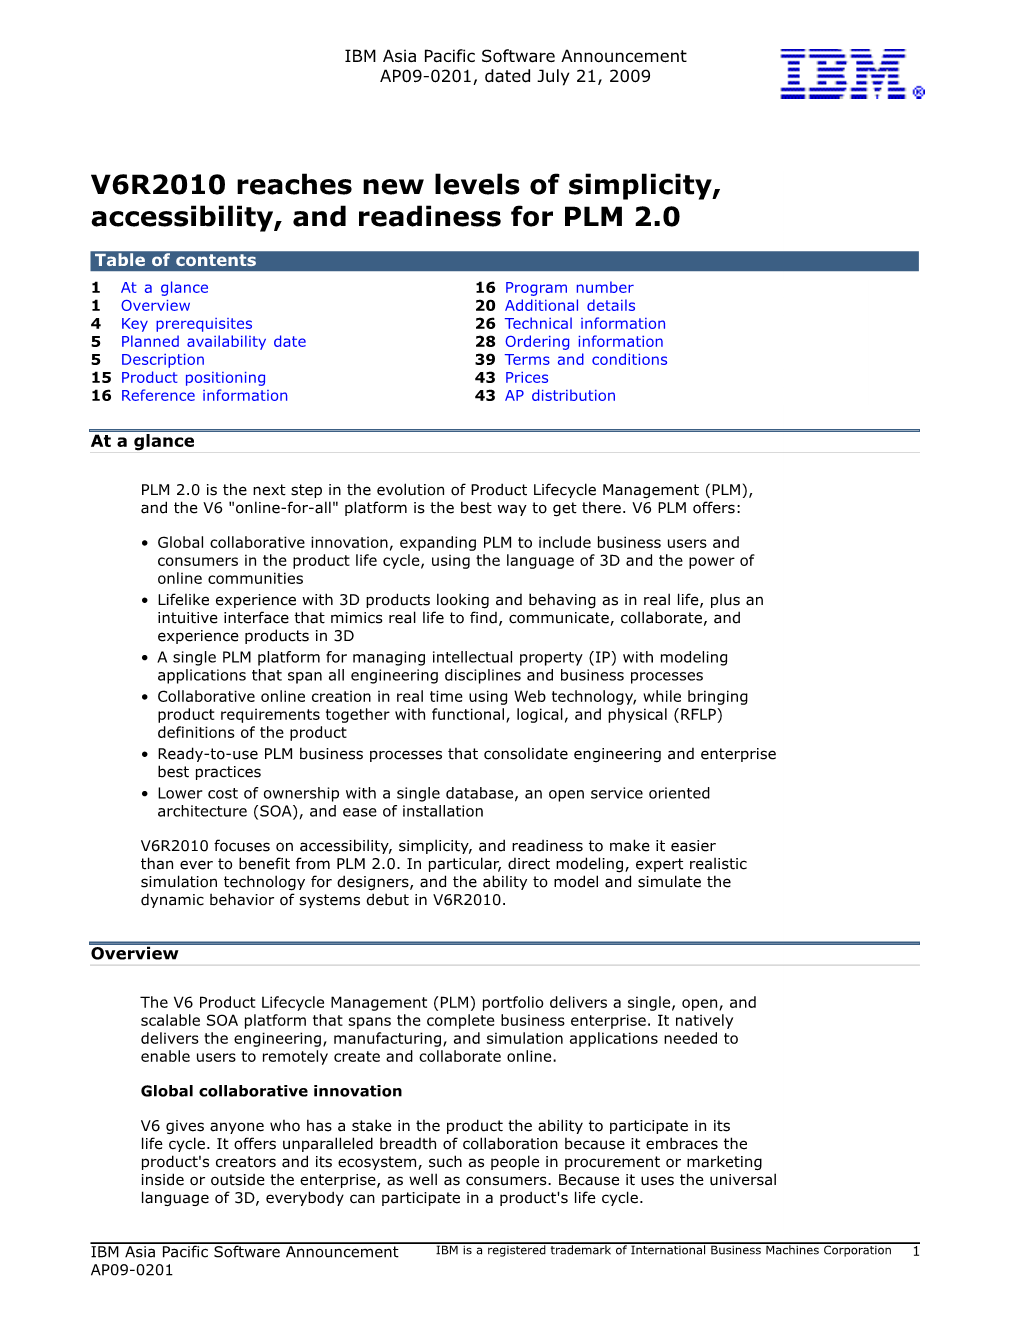 V6R2010 Reaches New Levels of Simplicity, Accessibility, and Readiness for PLM 2.0